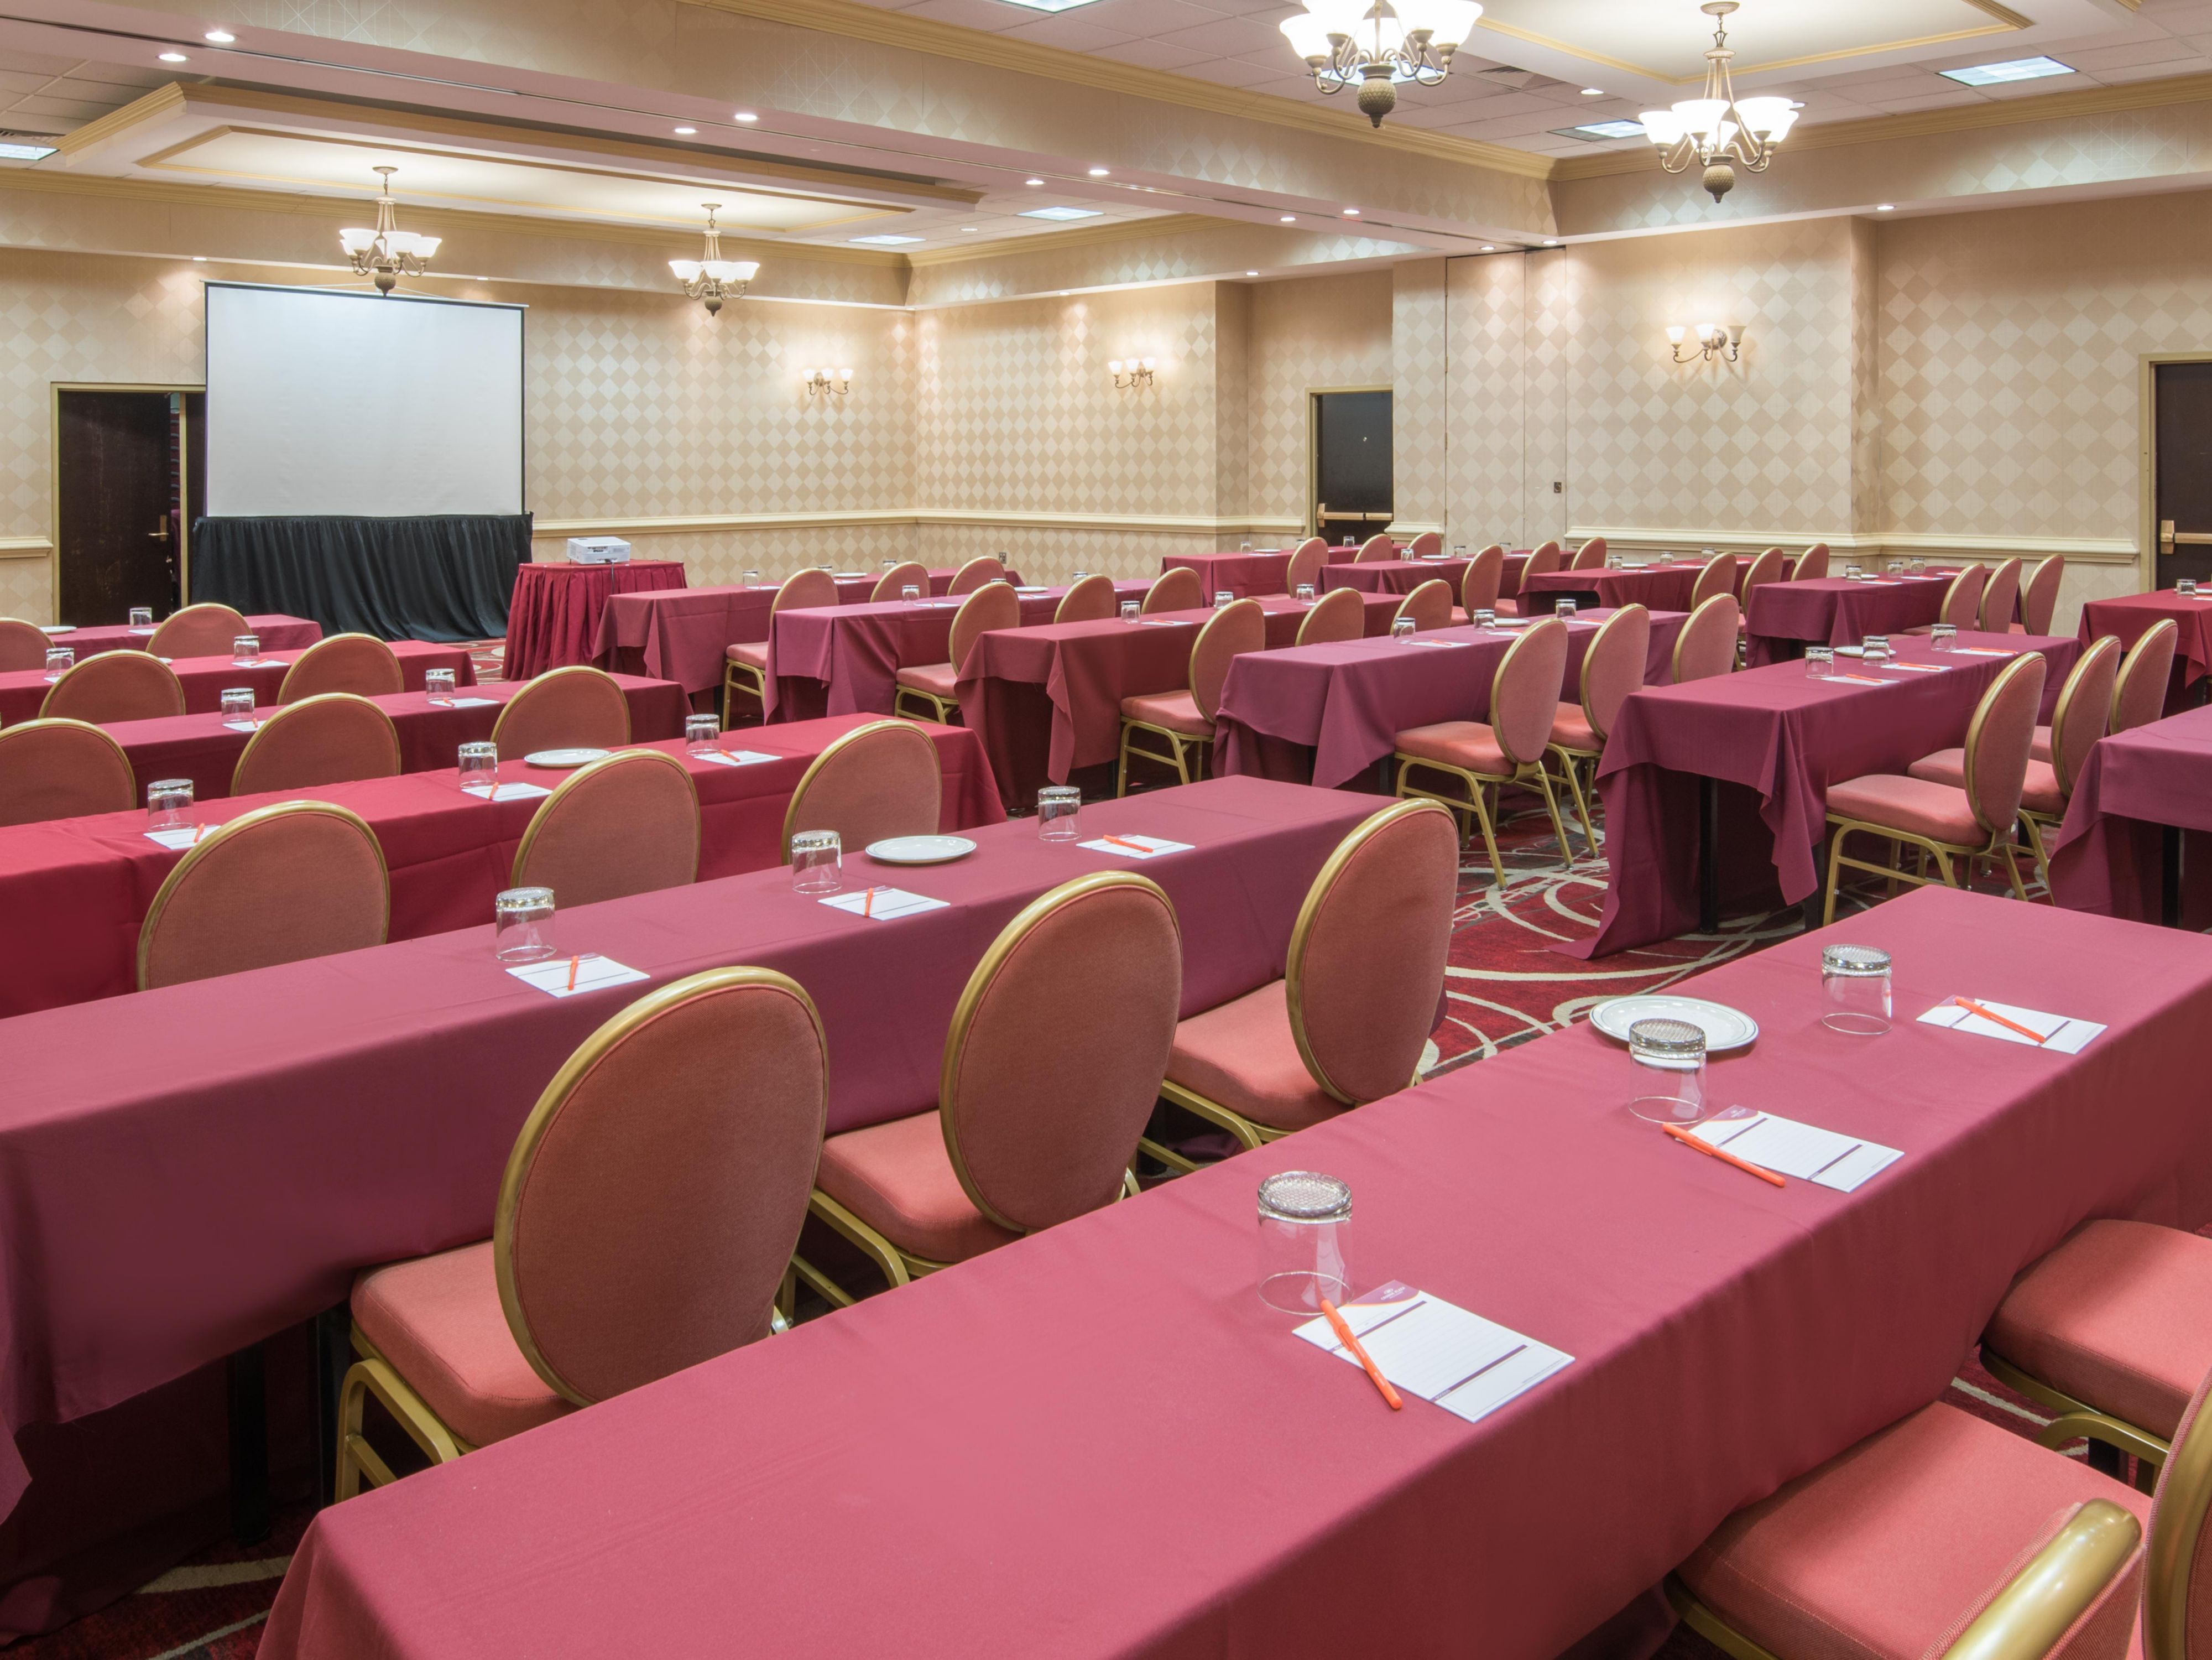 Host your Elizabeth, New Jersey event in style at our Newark airport hotel. With four versatile venues, including a Grand Ballroom, and 3,555 sq ft of contemporary event space, we are ideal for business meetings, conferences, weddings, and social gatherings for up to 250 guests.